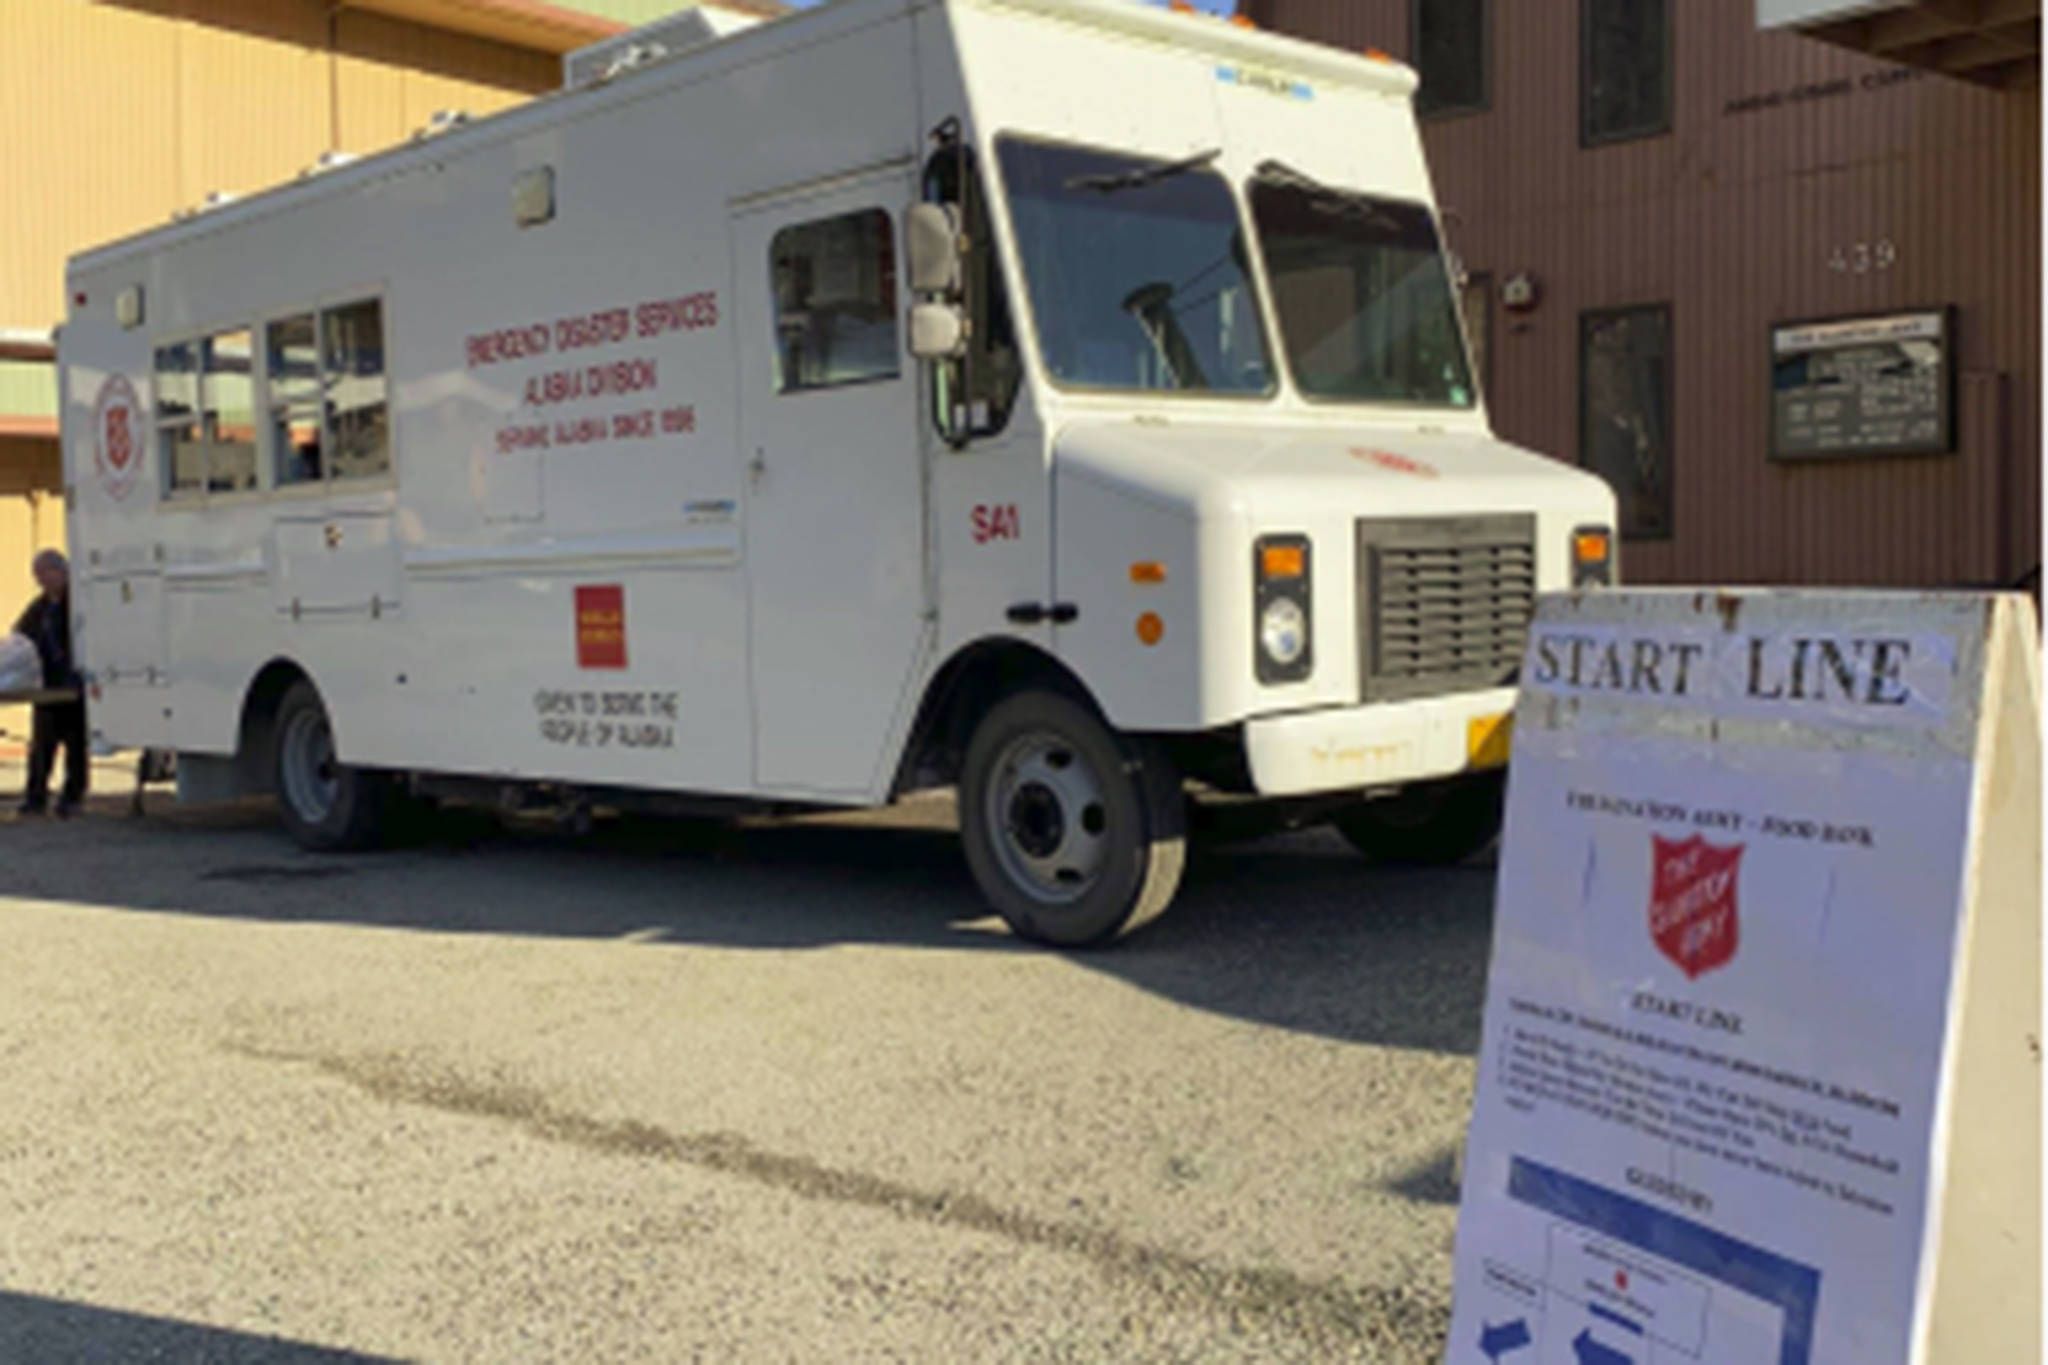 The Salvation Army, supported by the United Way of Southeast Alaska and local restaurants, will be providing Thanksgiving dinner to anyone who needs one from their food truck on Nov. 26, 2020. (Courtesy Photo / Salvation Army)